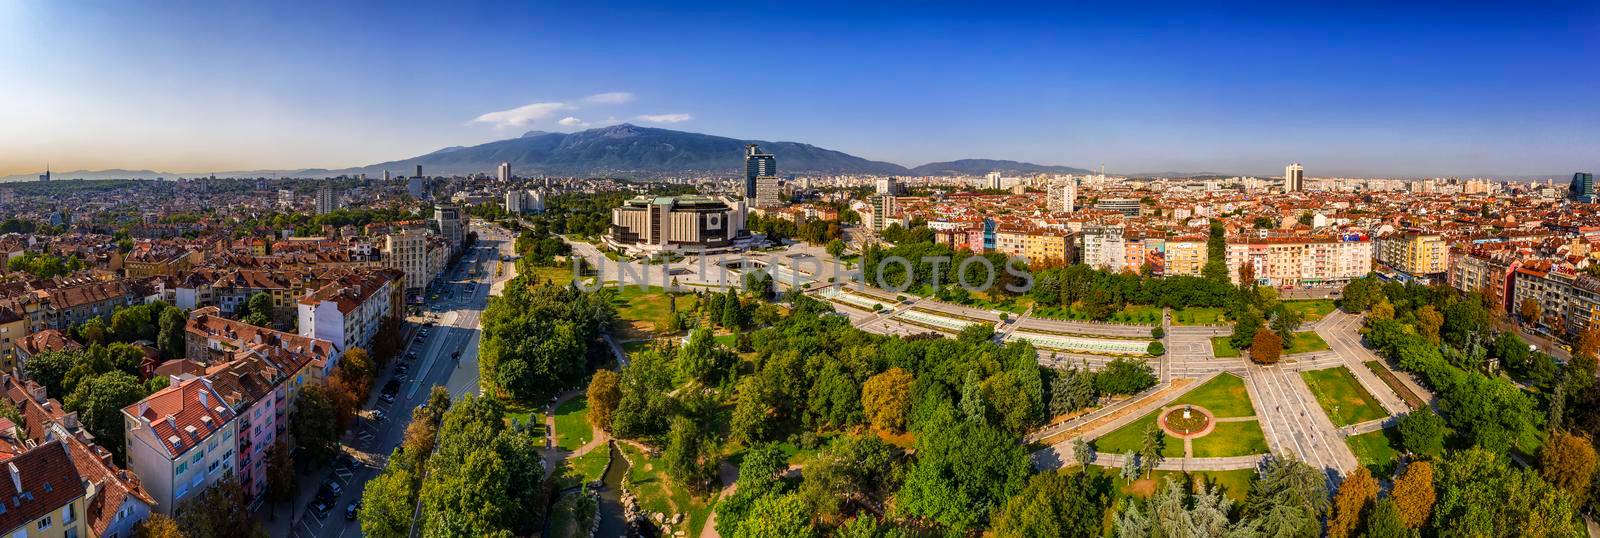 Sofia, Bulgaria - August 22, 2019: Amazing aerial panorama of the city center and National Palace of Culture in the city of Sofia,  capital of Bulgaria by EdVal